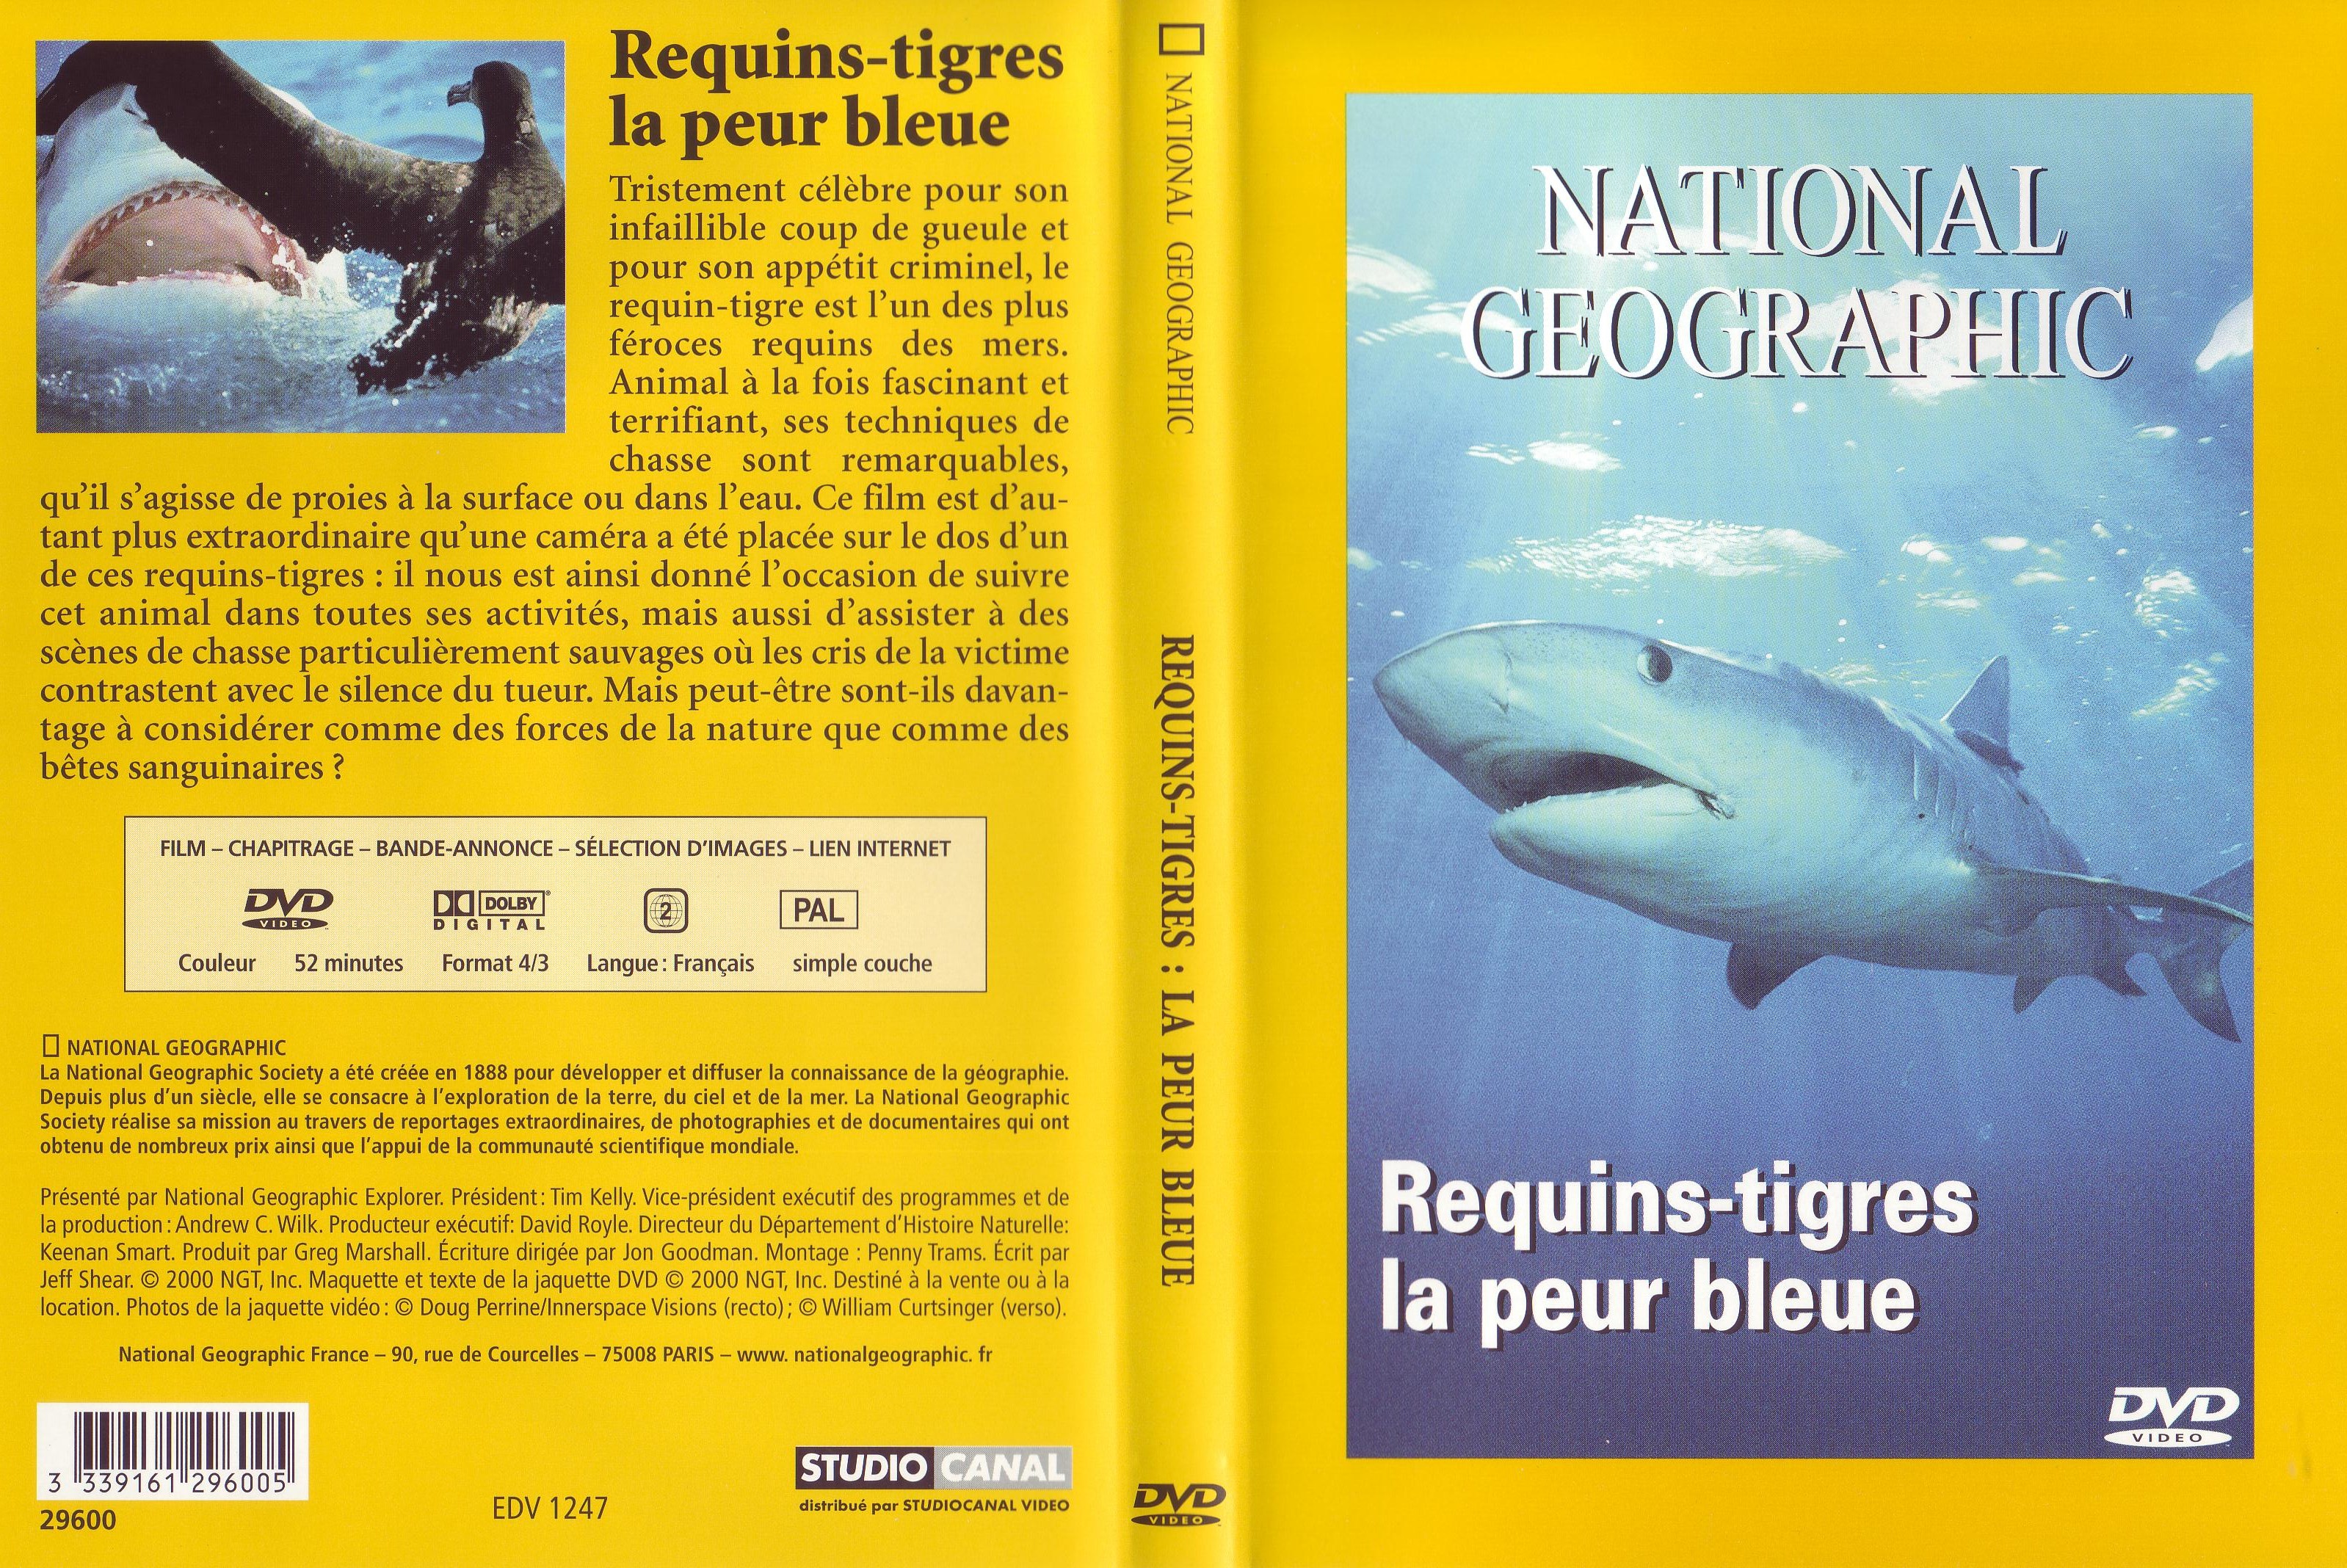 Jaquette DVD National Geographic - Requins tigres